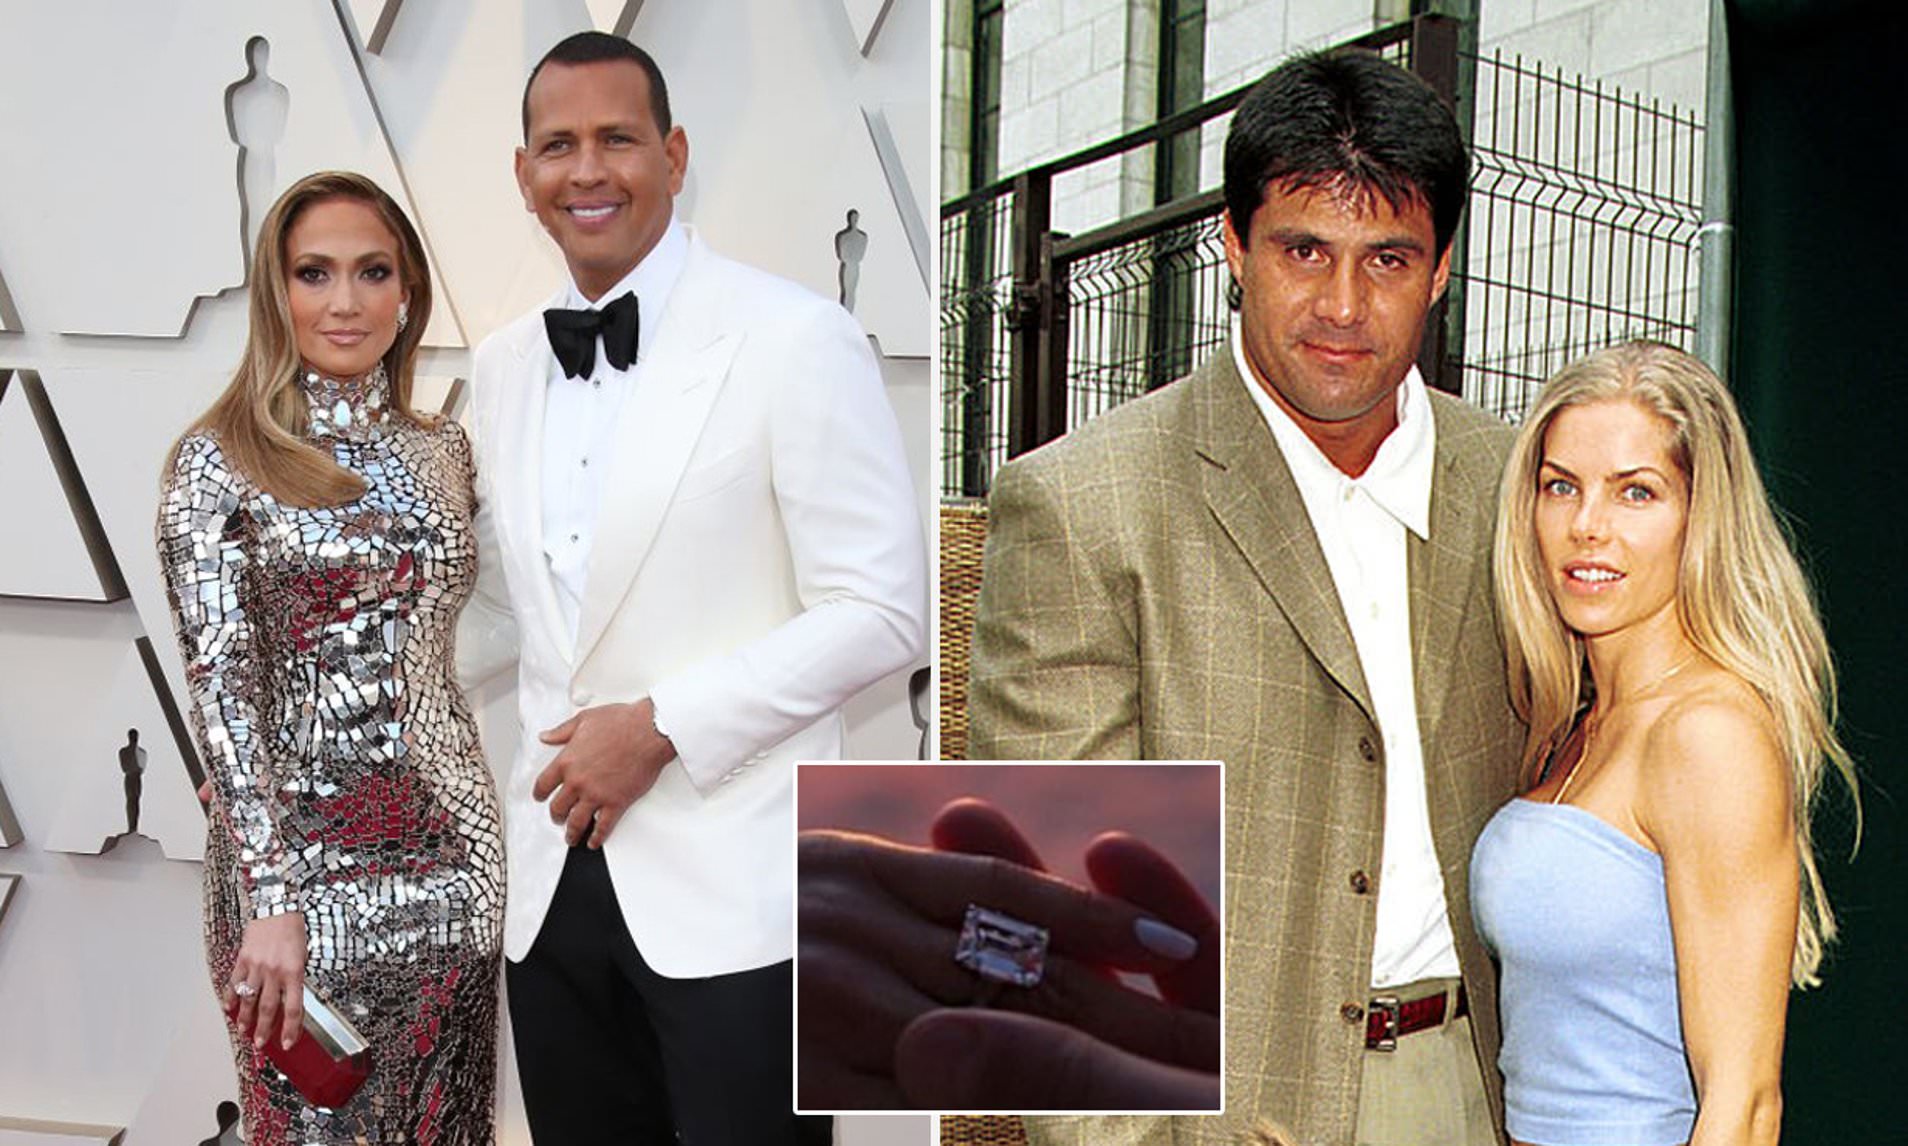 Jose Canseco Is Accusing A-Rod of Cheating on Jennifer Lopez With His Ex-Wife